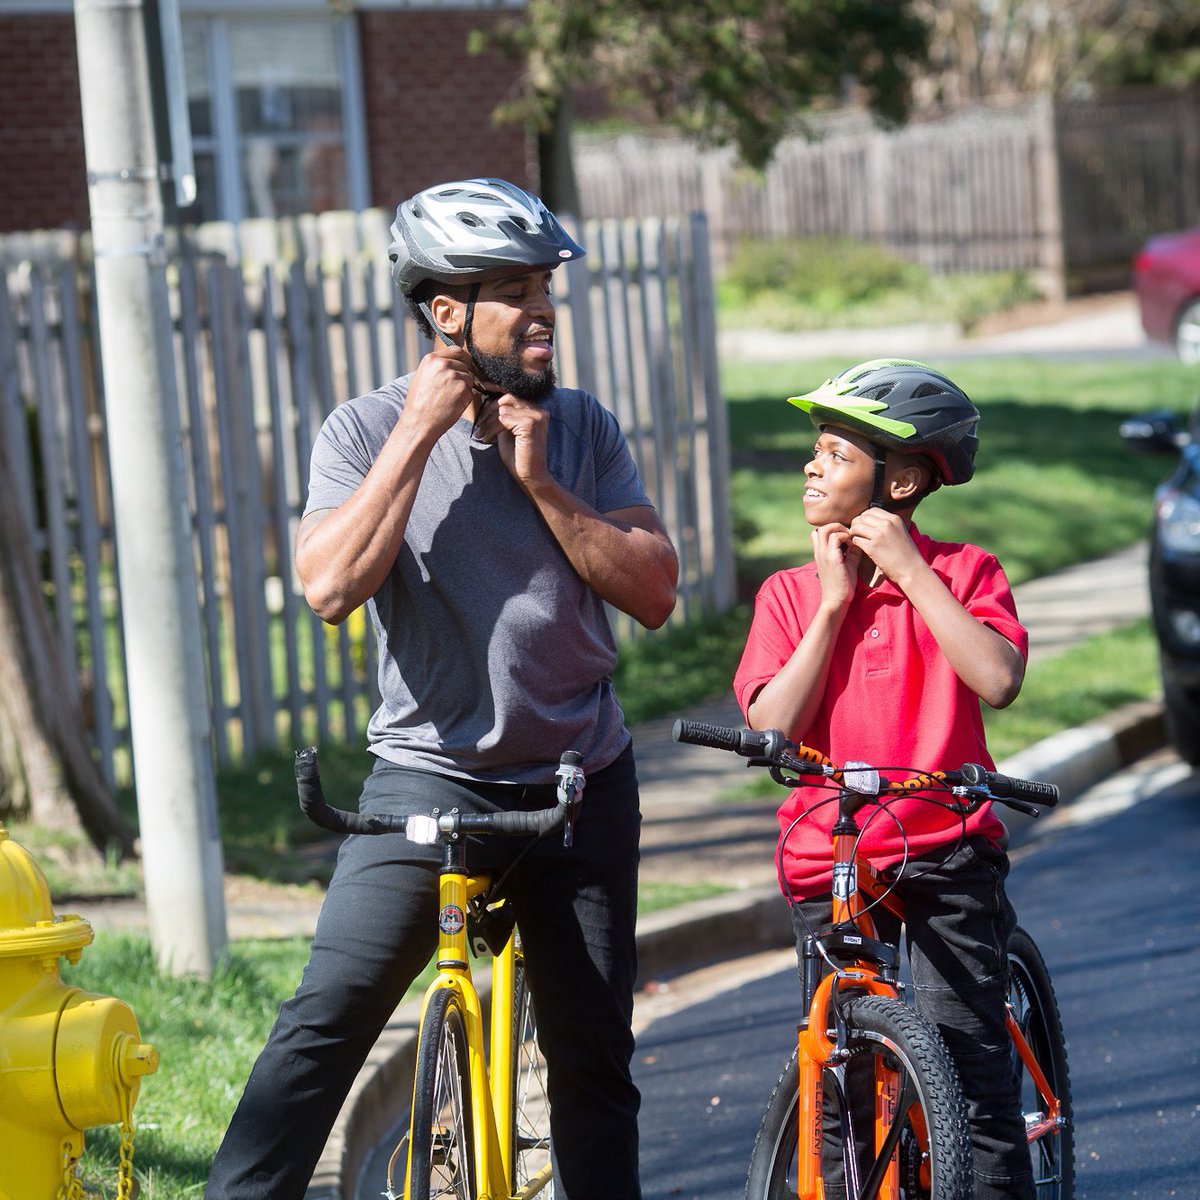 Do you always wear your bike helmet? When you show your kids how to ride safely, they'll follow. #WheeledSports #safety #parents #kids #helmet  bit.ly/EnjoyRide